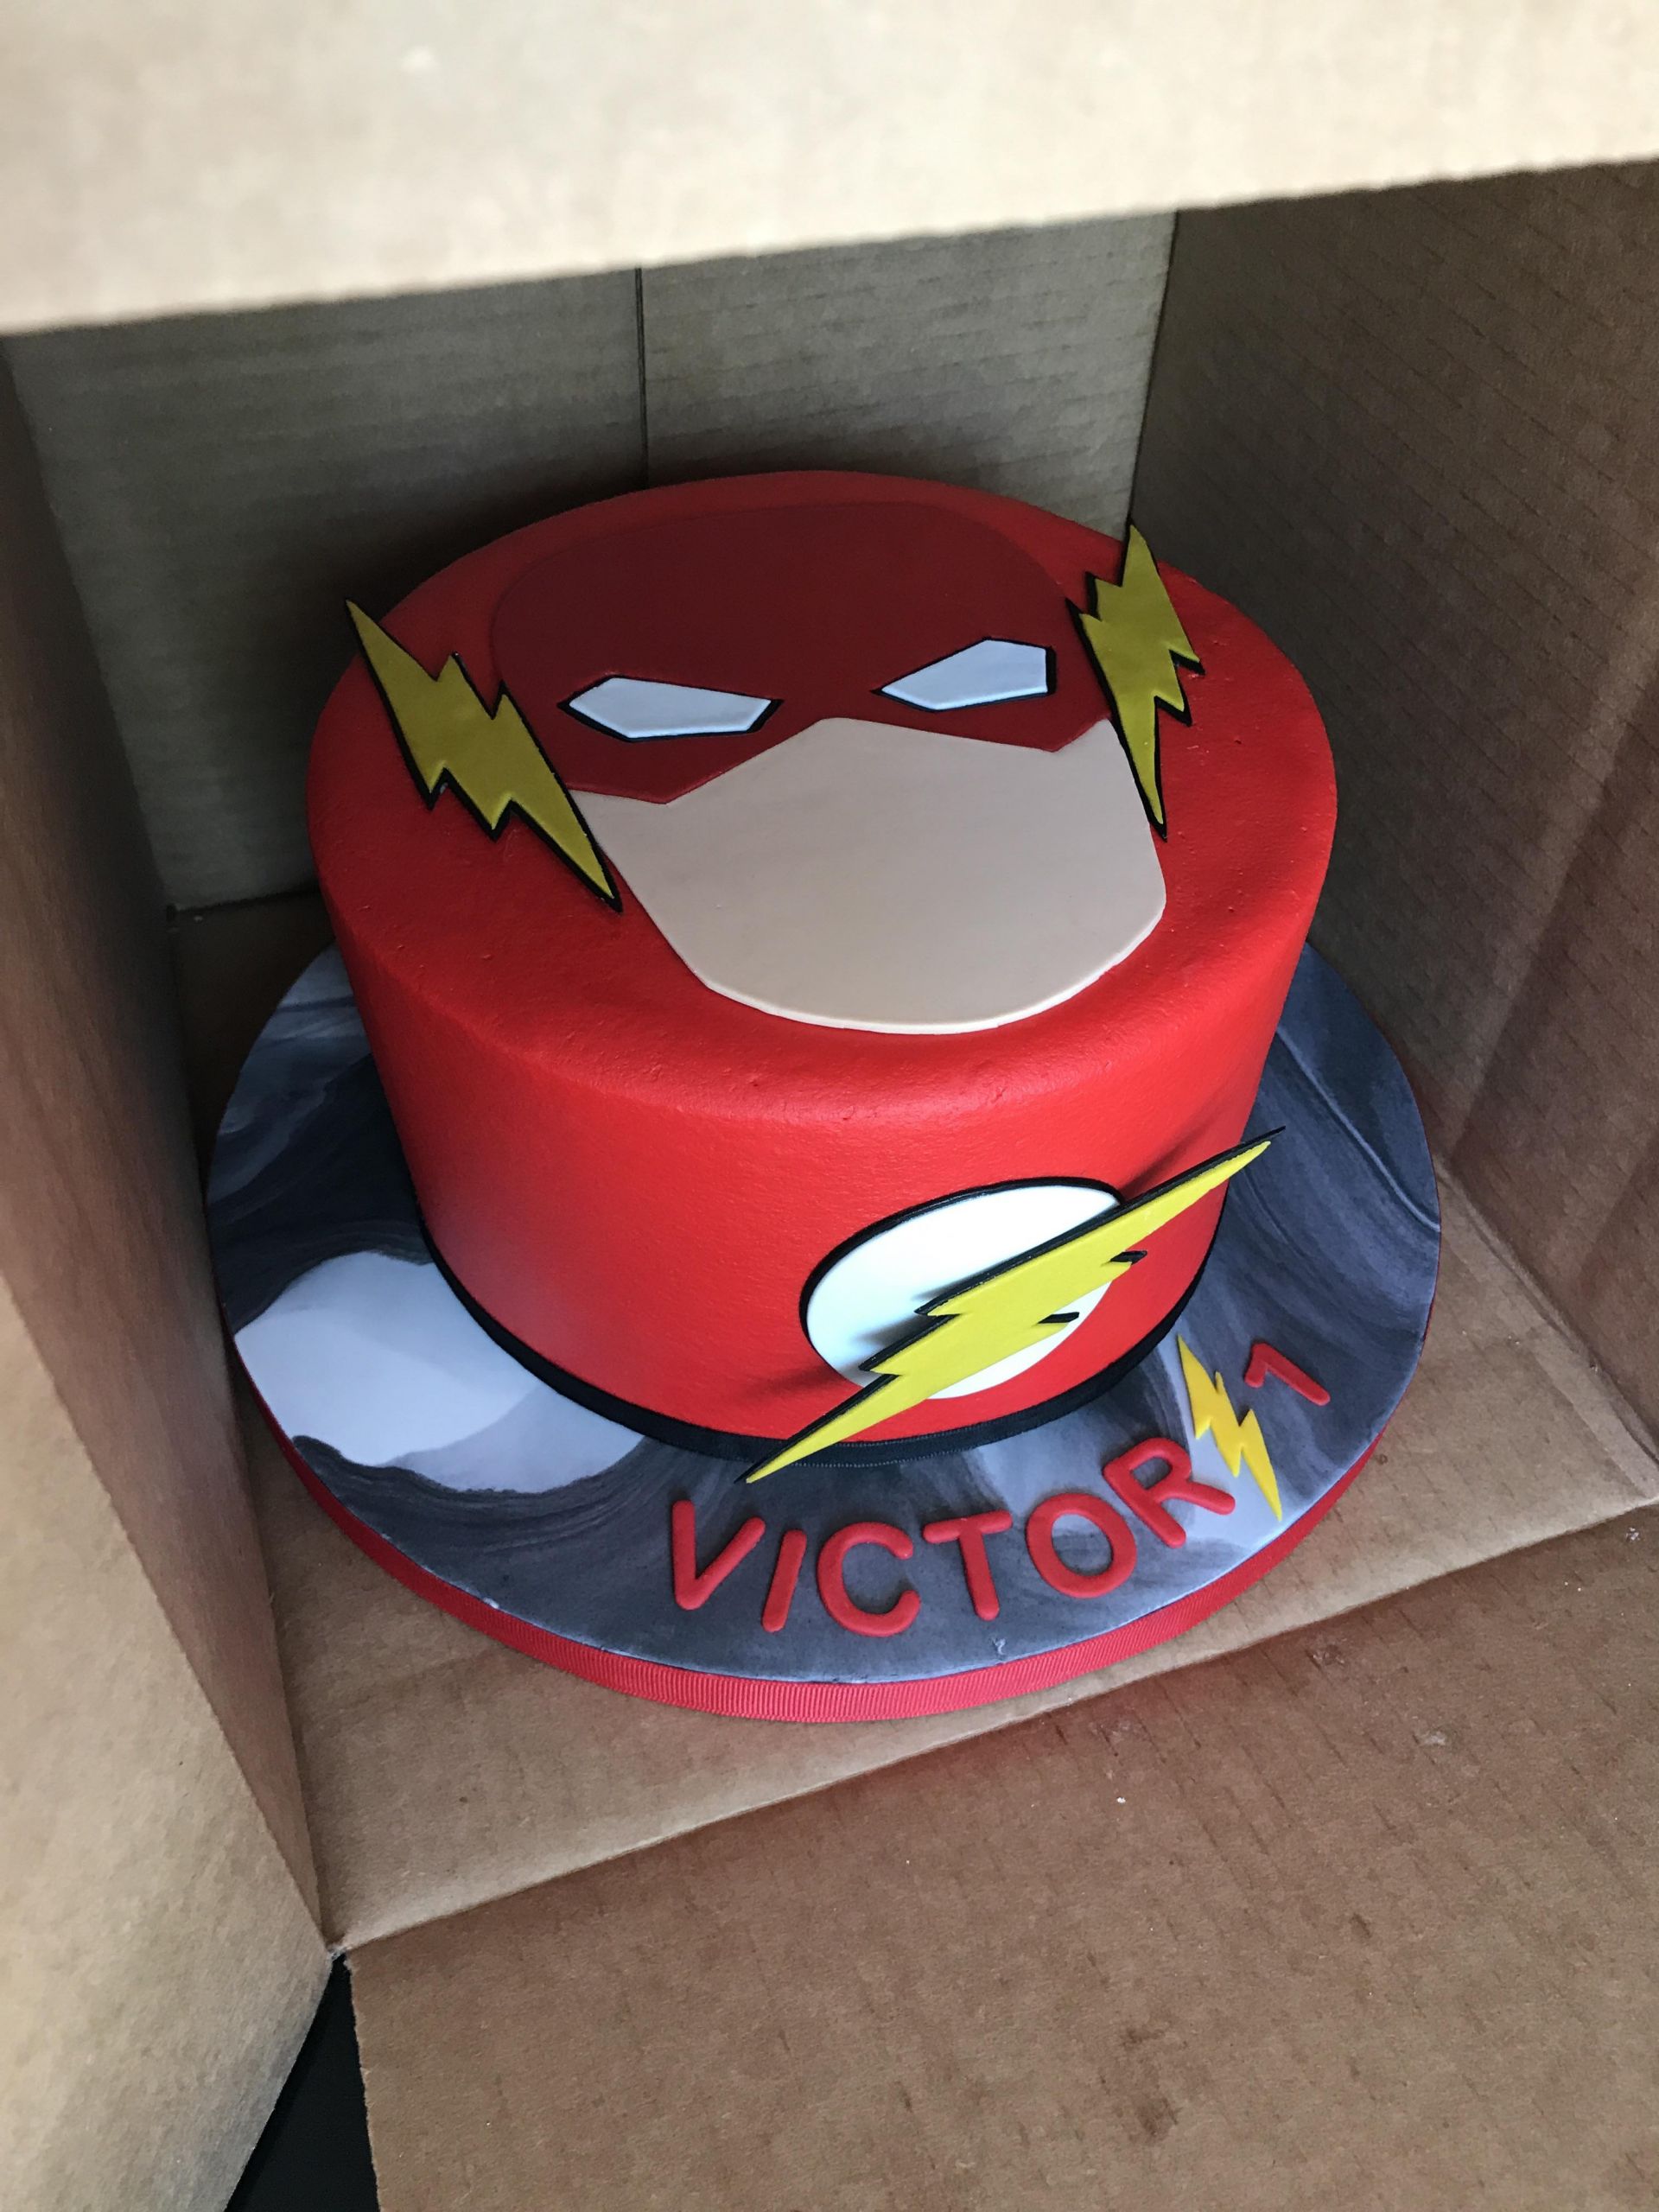 Flash Birthday Cake
 Just picked up the cake for my son s birthday theflash